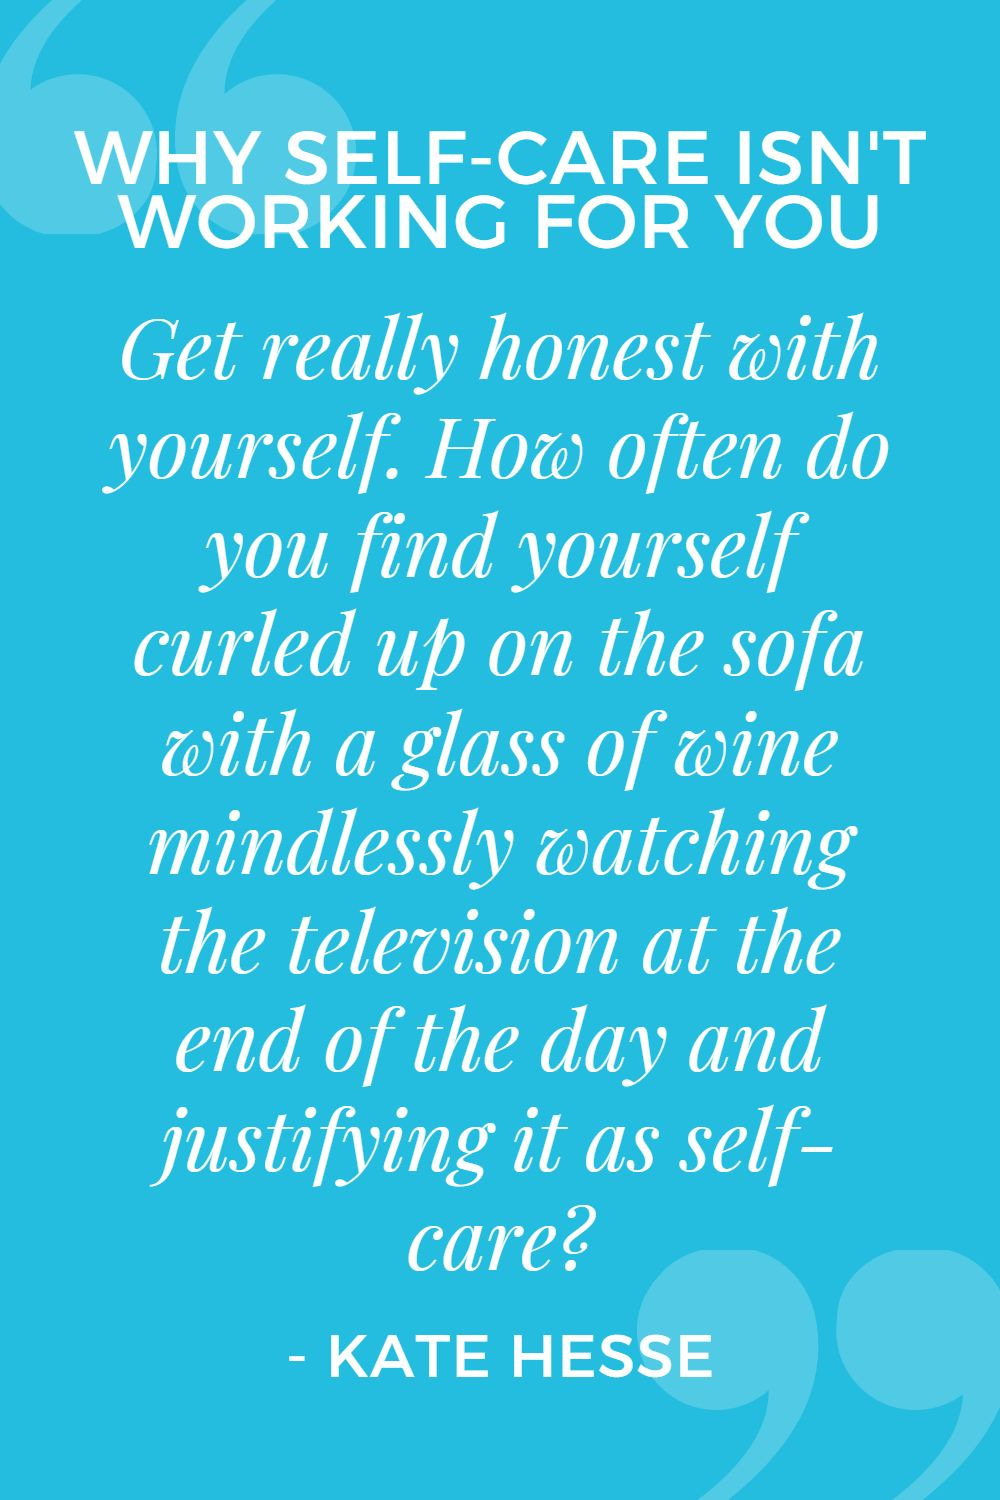 Get really honest with yourself.  How often do you find yourself curled up on the sofa with a glass of wine mindlessly watching the television at the end of the day and justifying it as self-care?